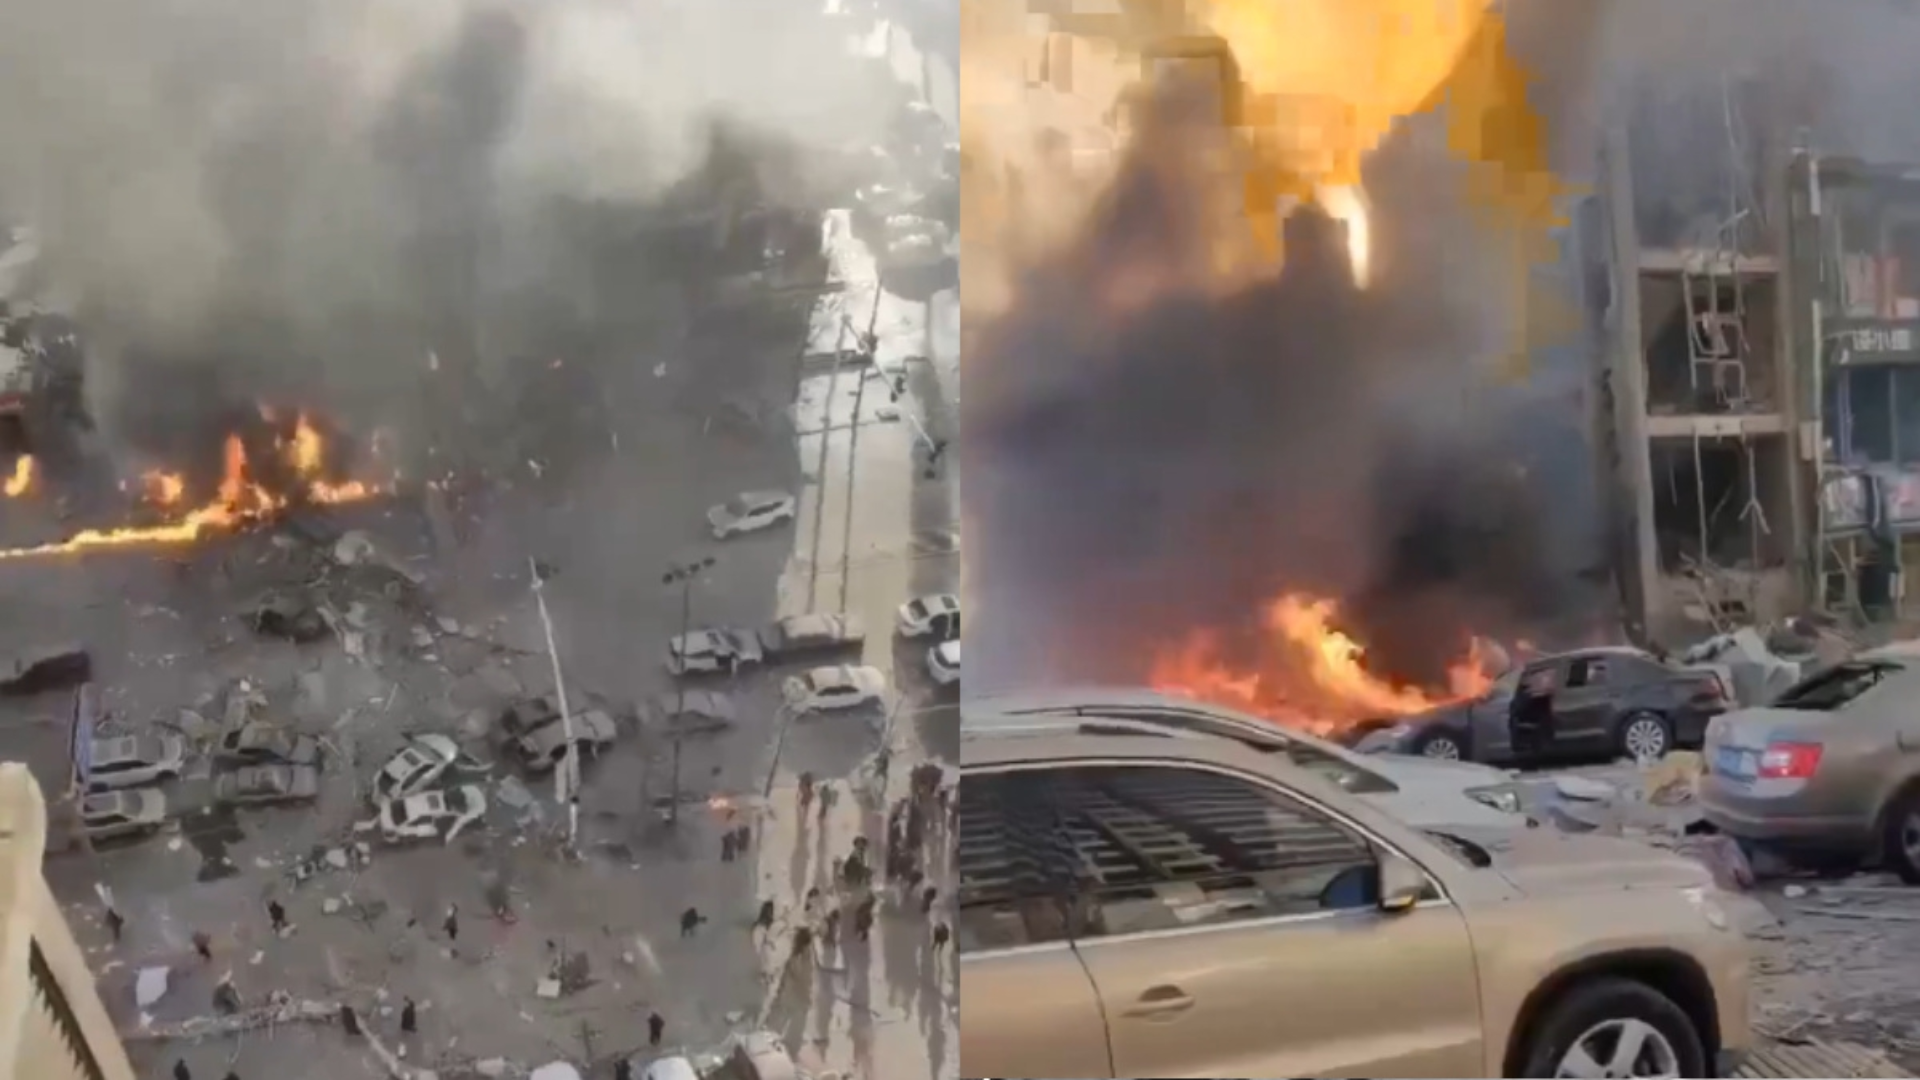 Massive Blast in Yanjiao, China Destroys Several Buildings and Vehicles, According to Reports